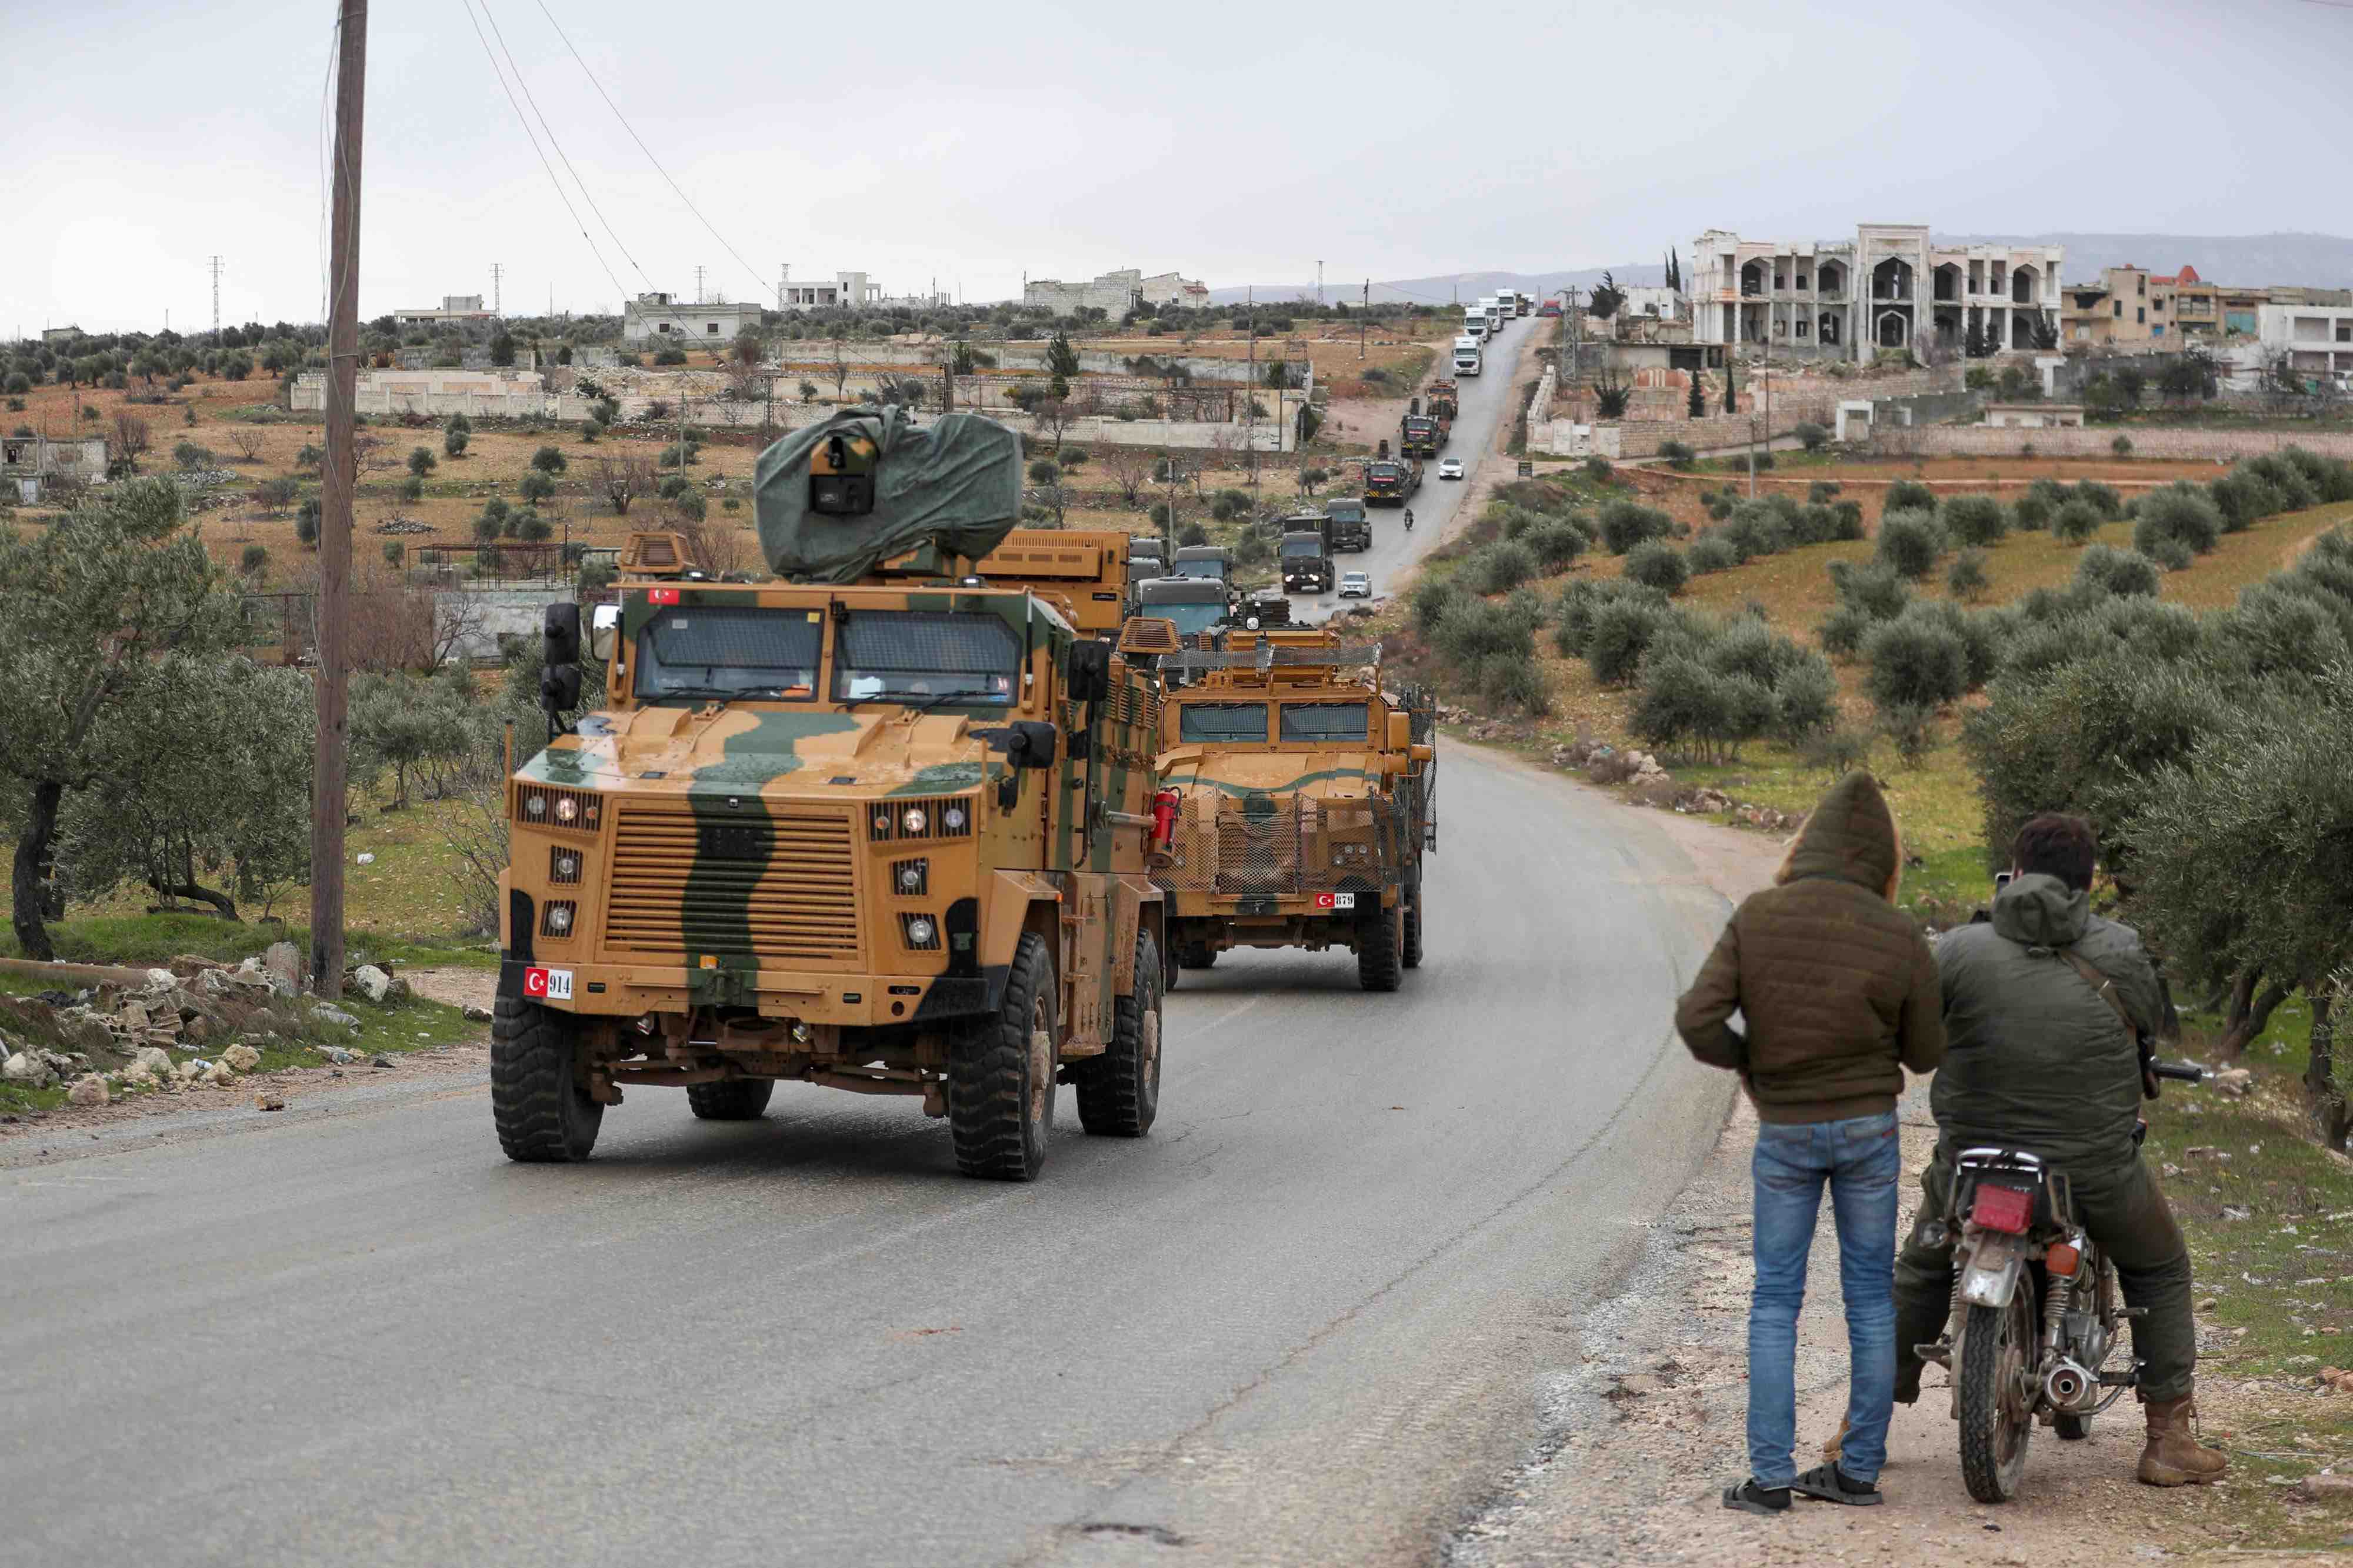 Three hundred Turkish vehicles entered Idlib on Saturday, bringing the total to around 1,000 this month